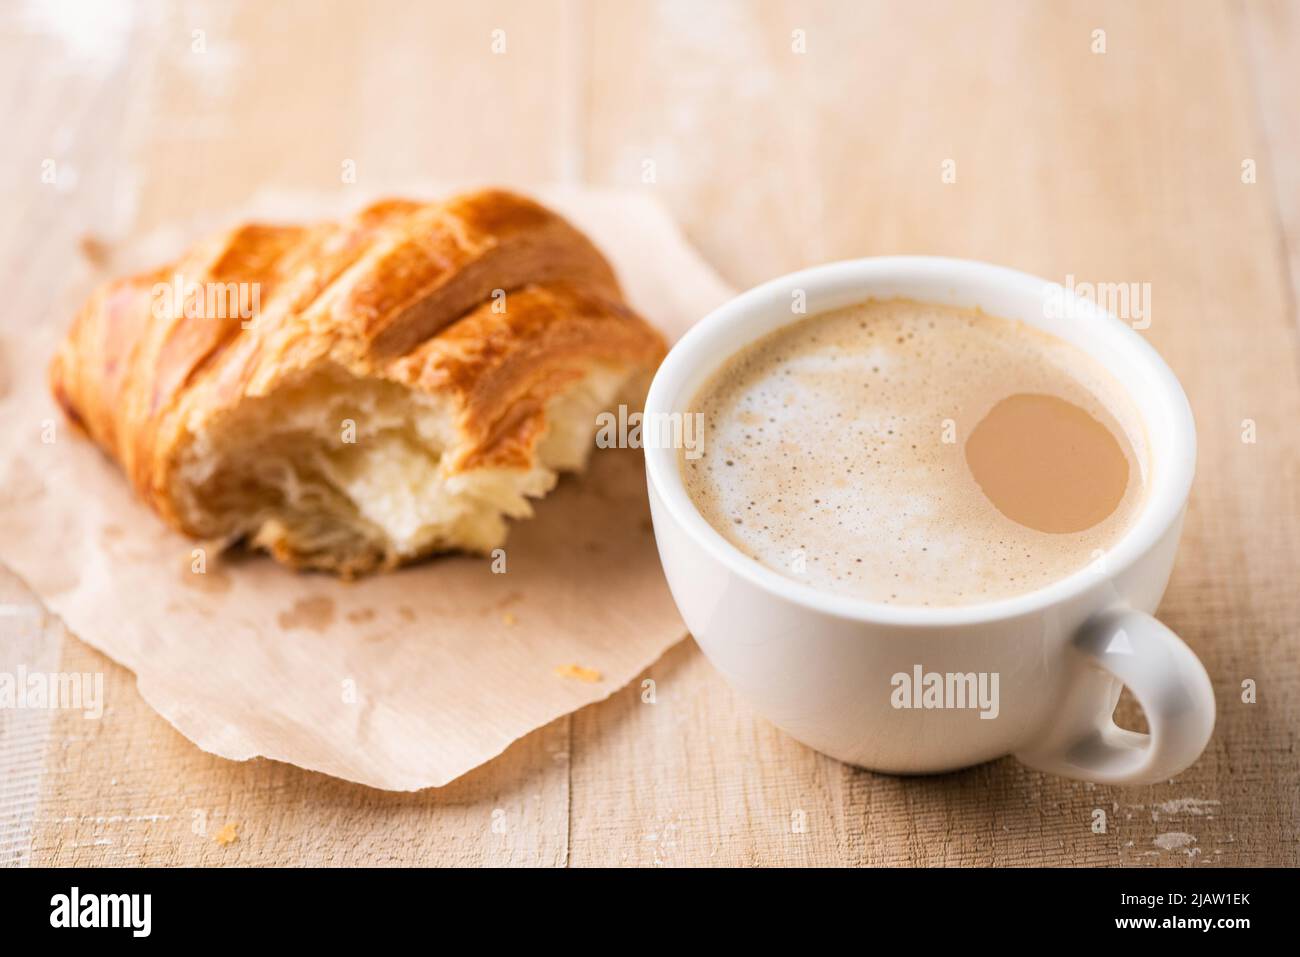 Cappuccino coffee and croissant on wooden table, croissant missing bite Stock Photo